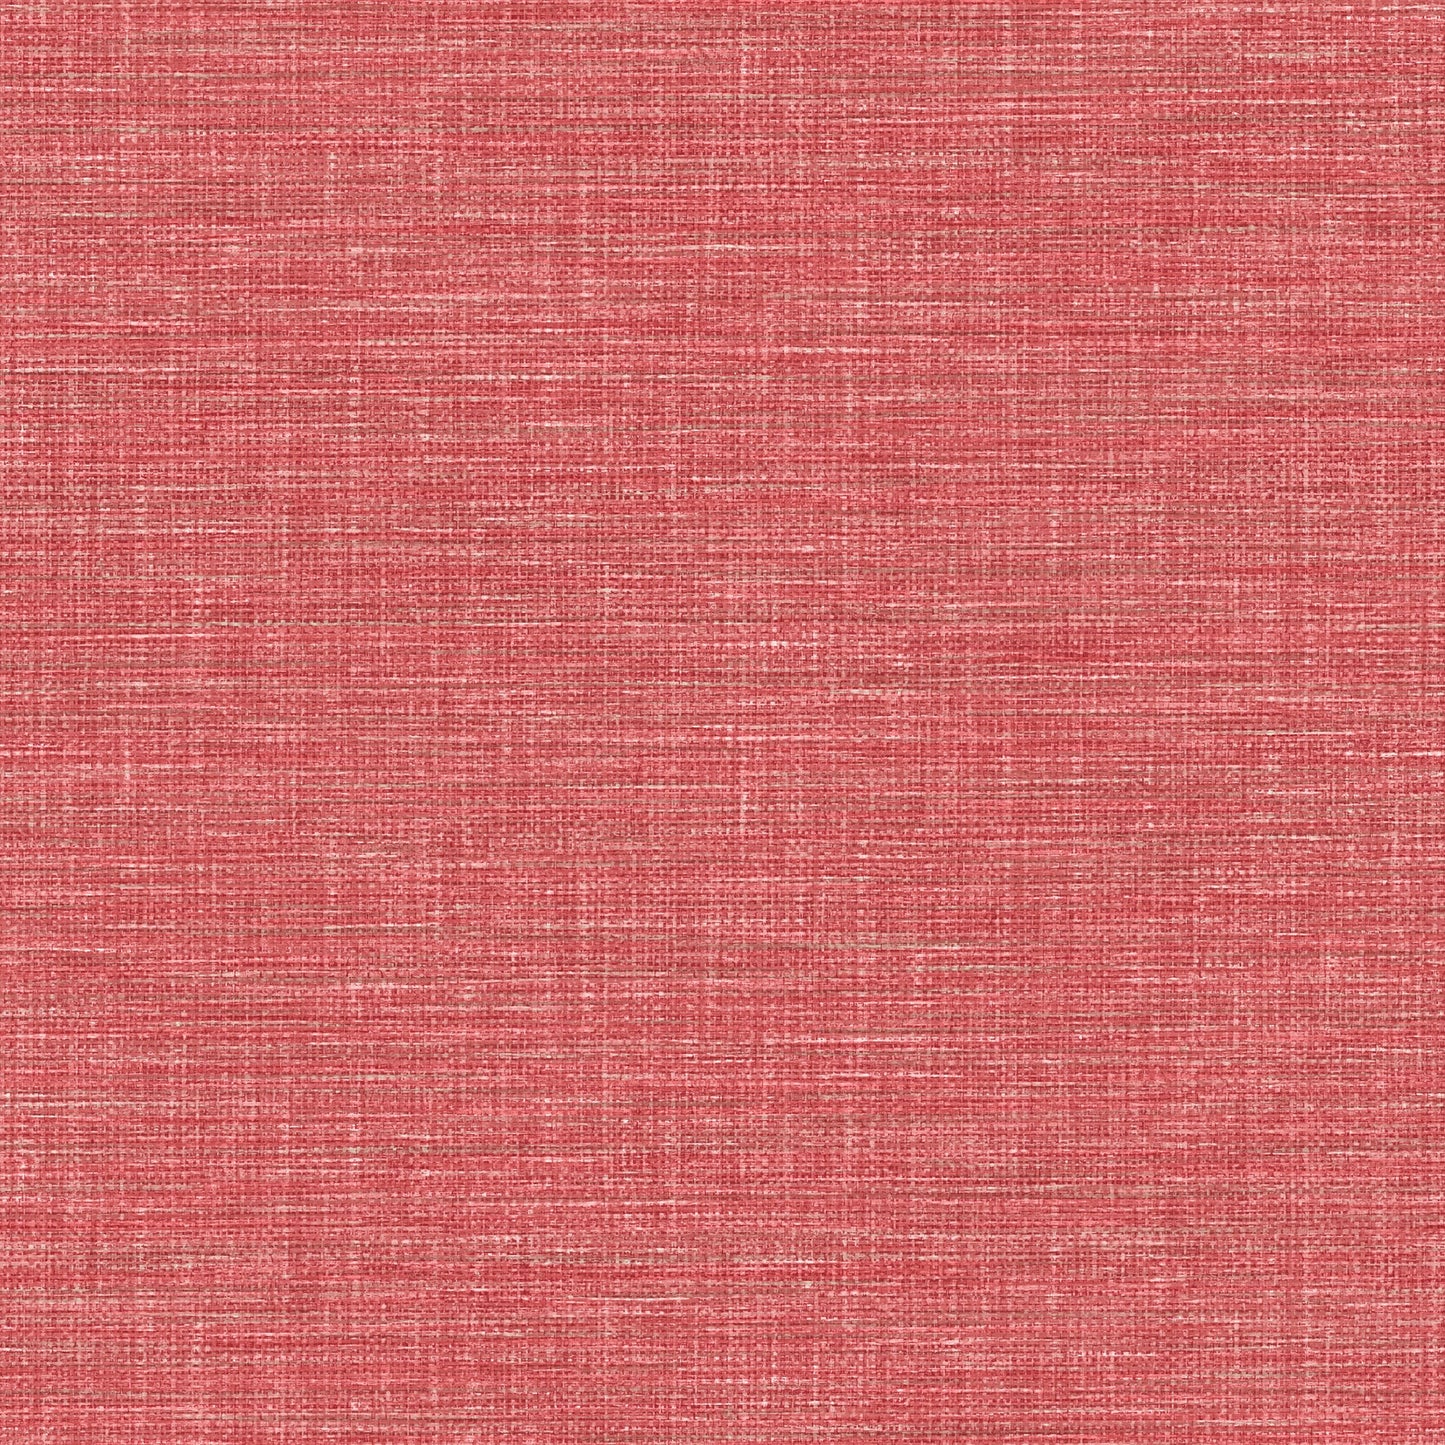 Save on 2744-24117 Solstice Coral Faux Effects A-Street Prints Wallpaper